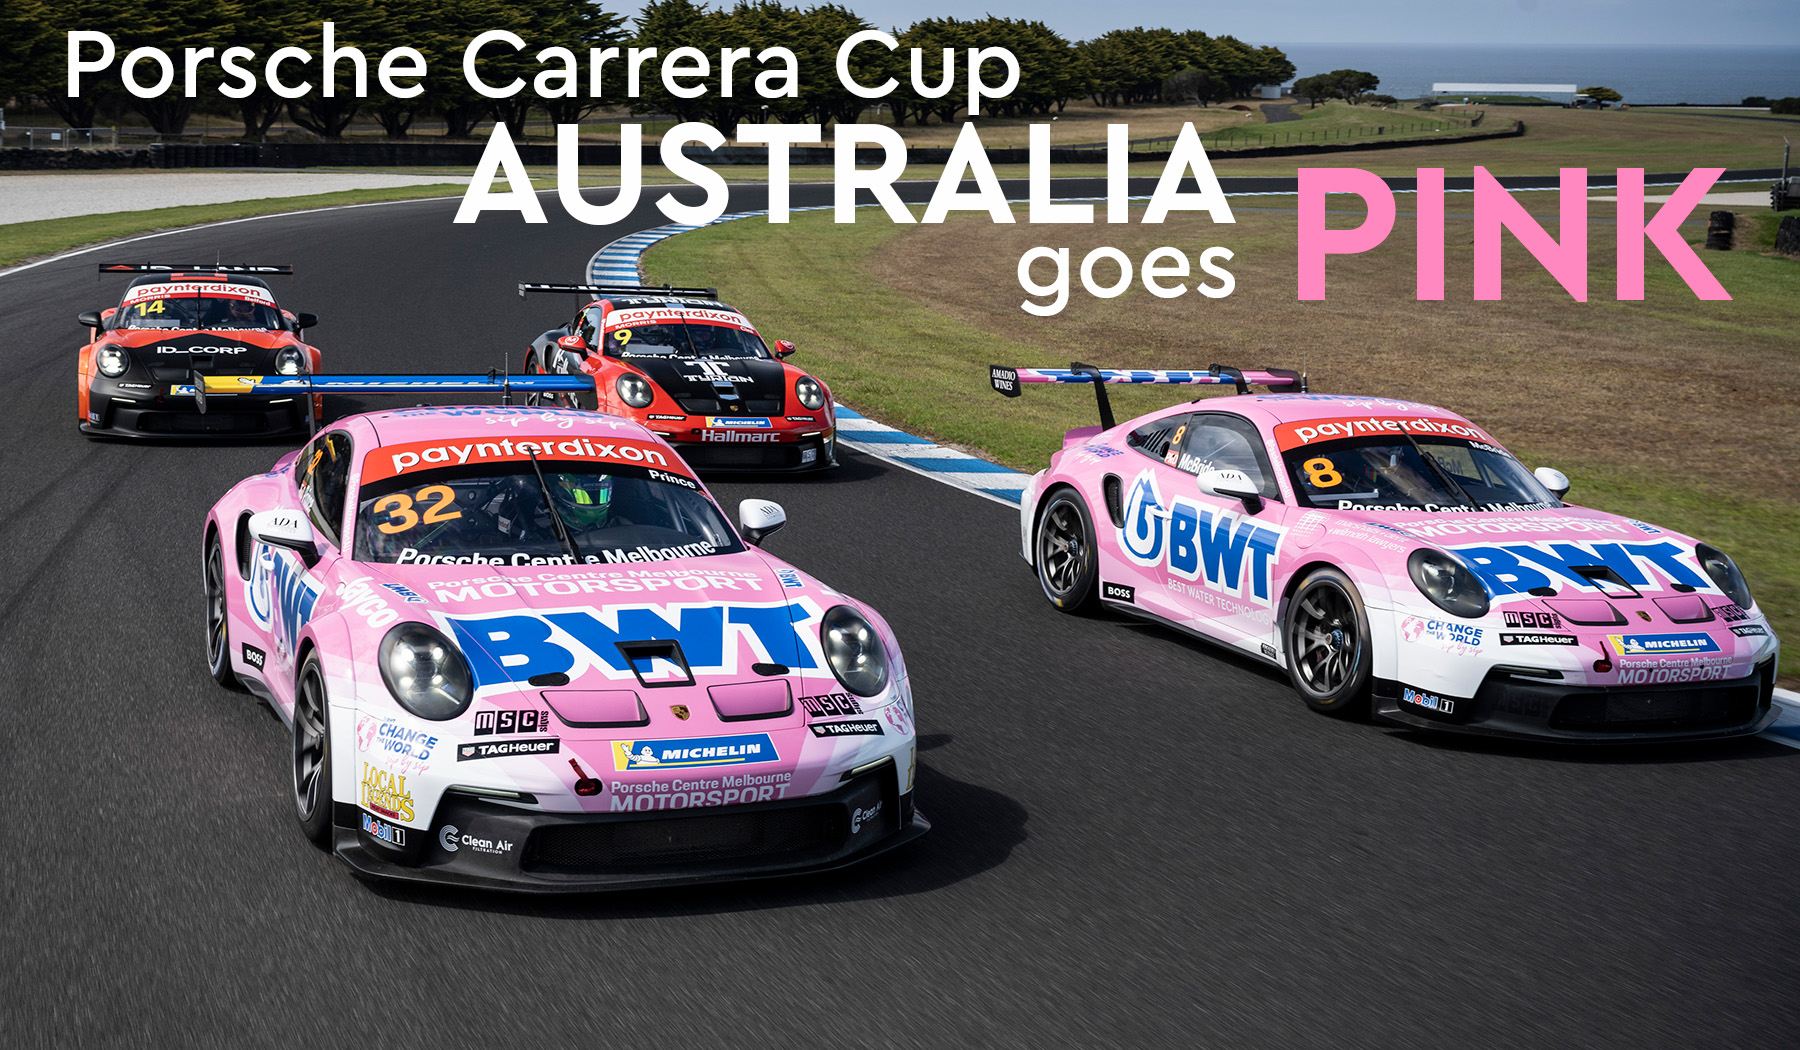 PCM and BWT joins together for the Carrera Cup Australia